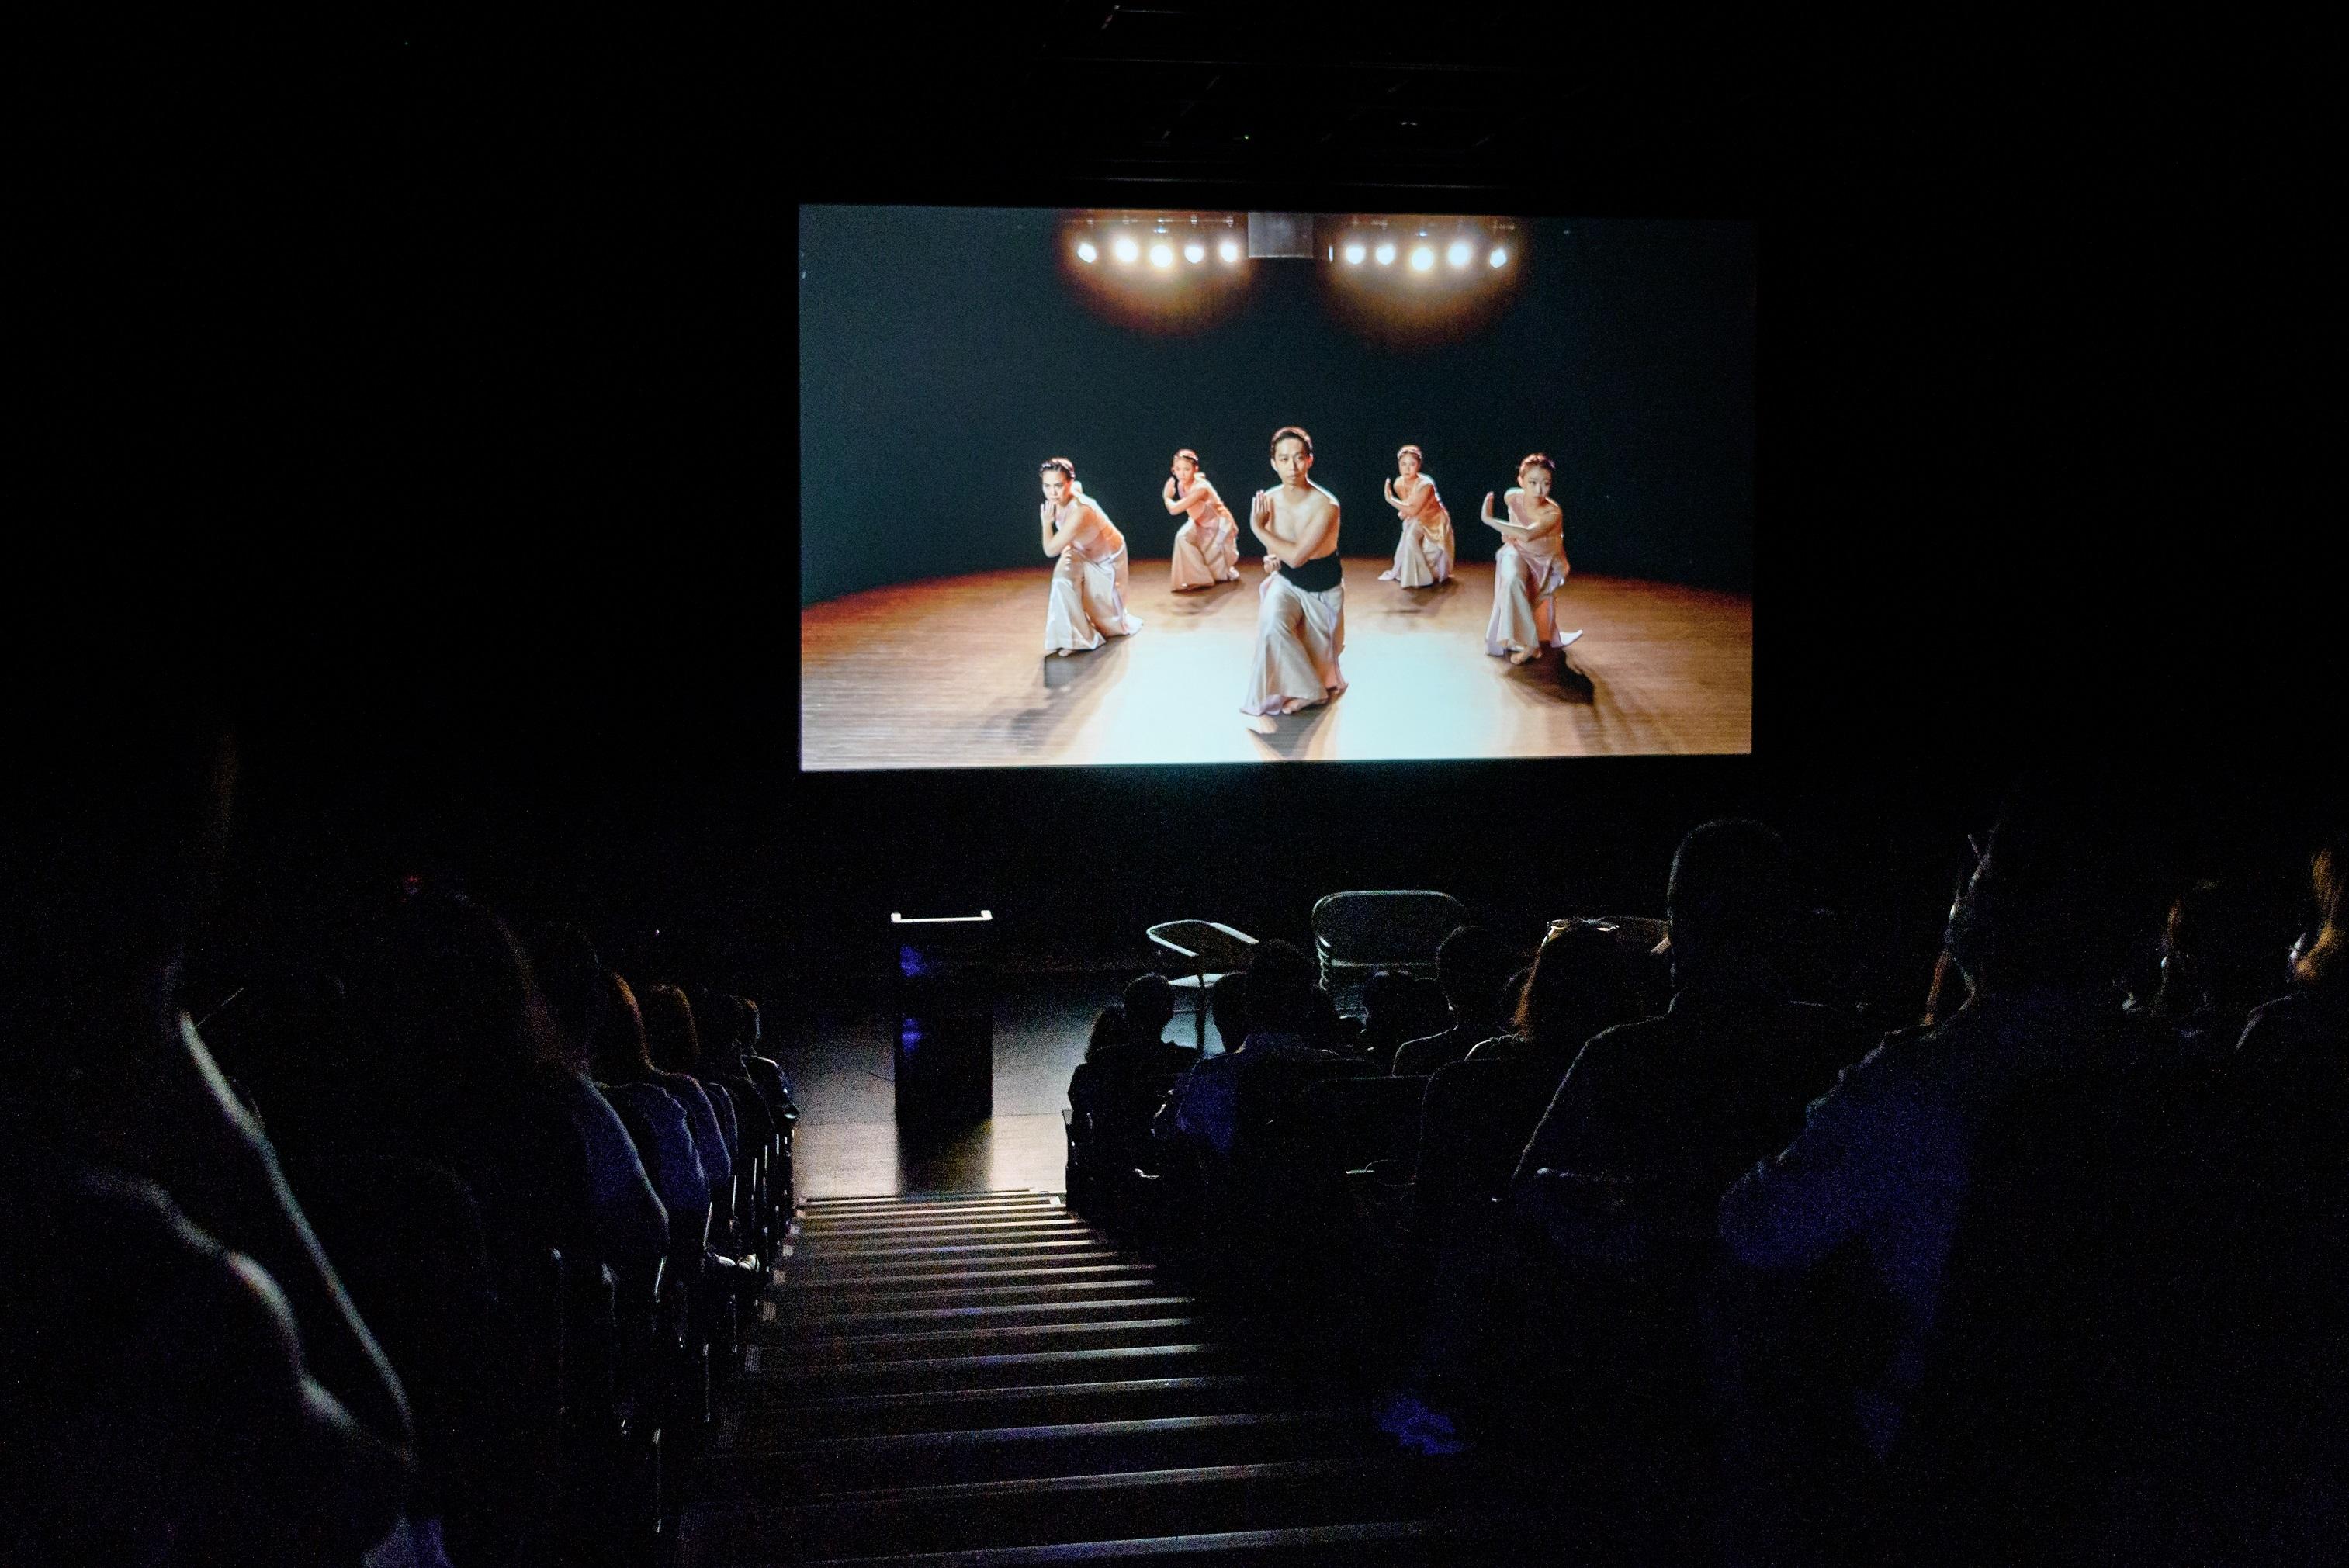 In celebration of the 25th anniversary of the establishment of the Hong Kong Special Administrative Region, the Hong Kong Economic and Trade Office in Singapore presented a dance performance, "Convergence: A Dialogue in Dance between Hong Kong and Singapore", today (July 30). Photo shows a collaborative dance film being shown at the event. 